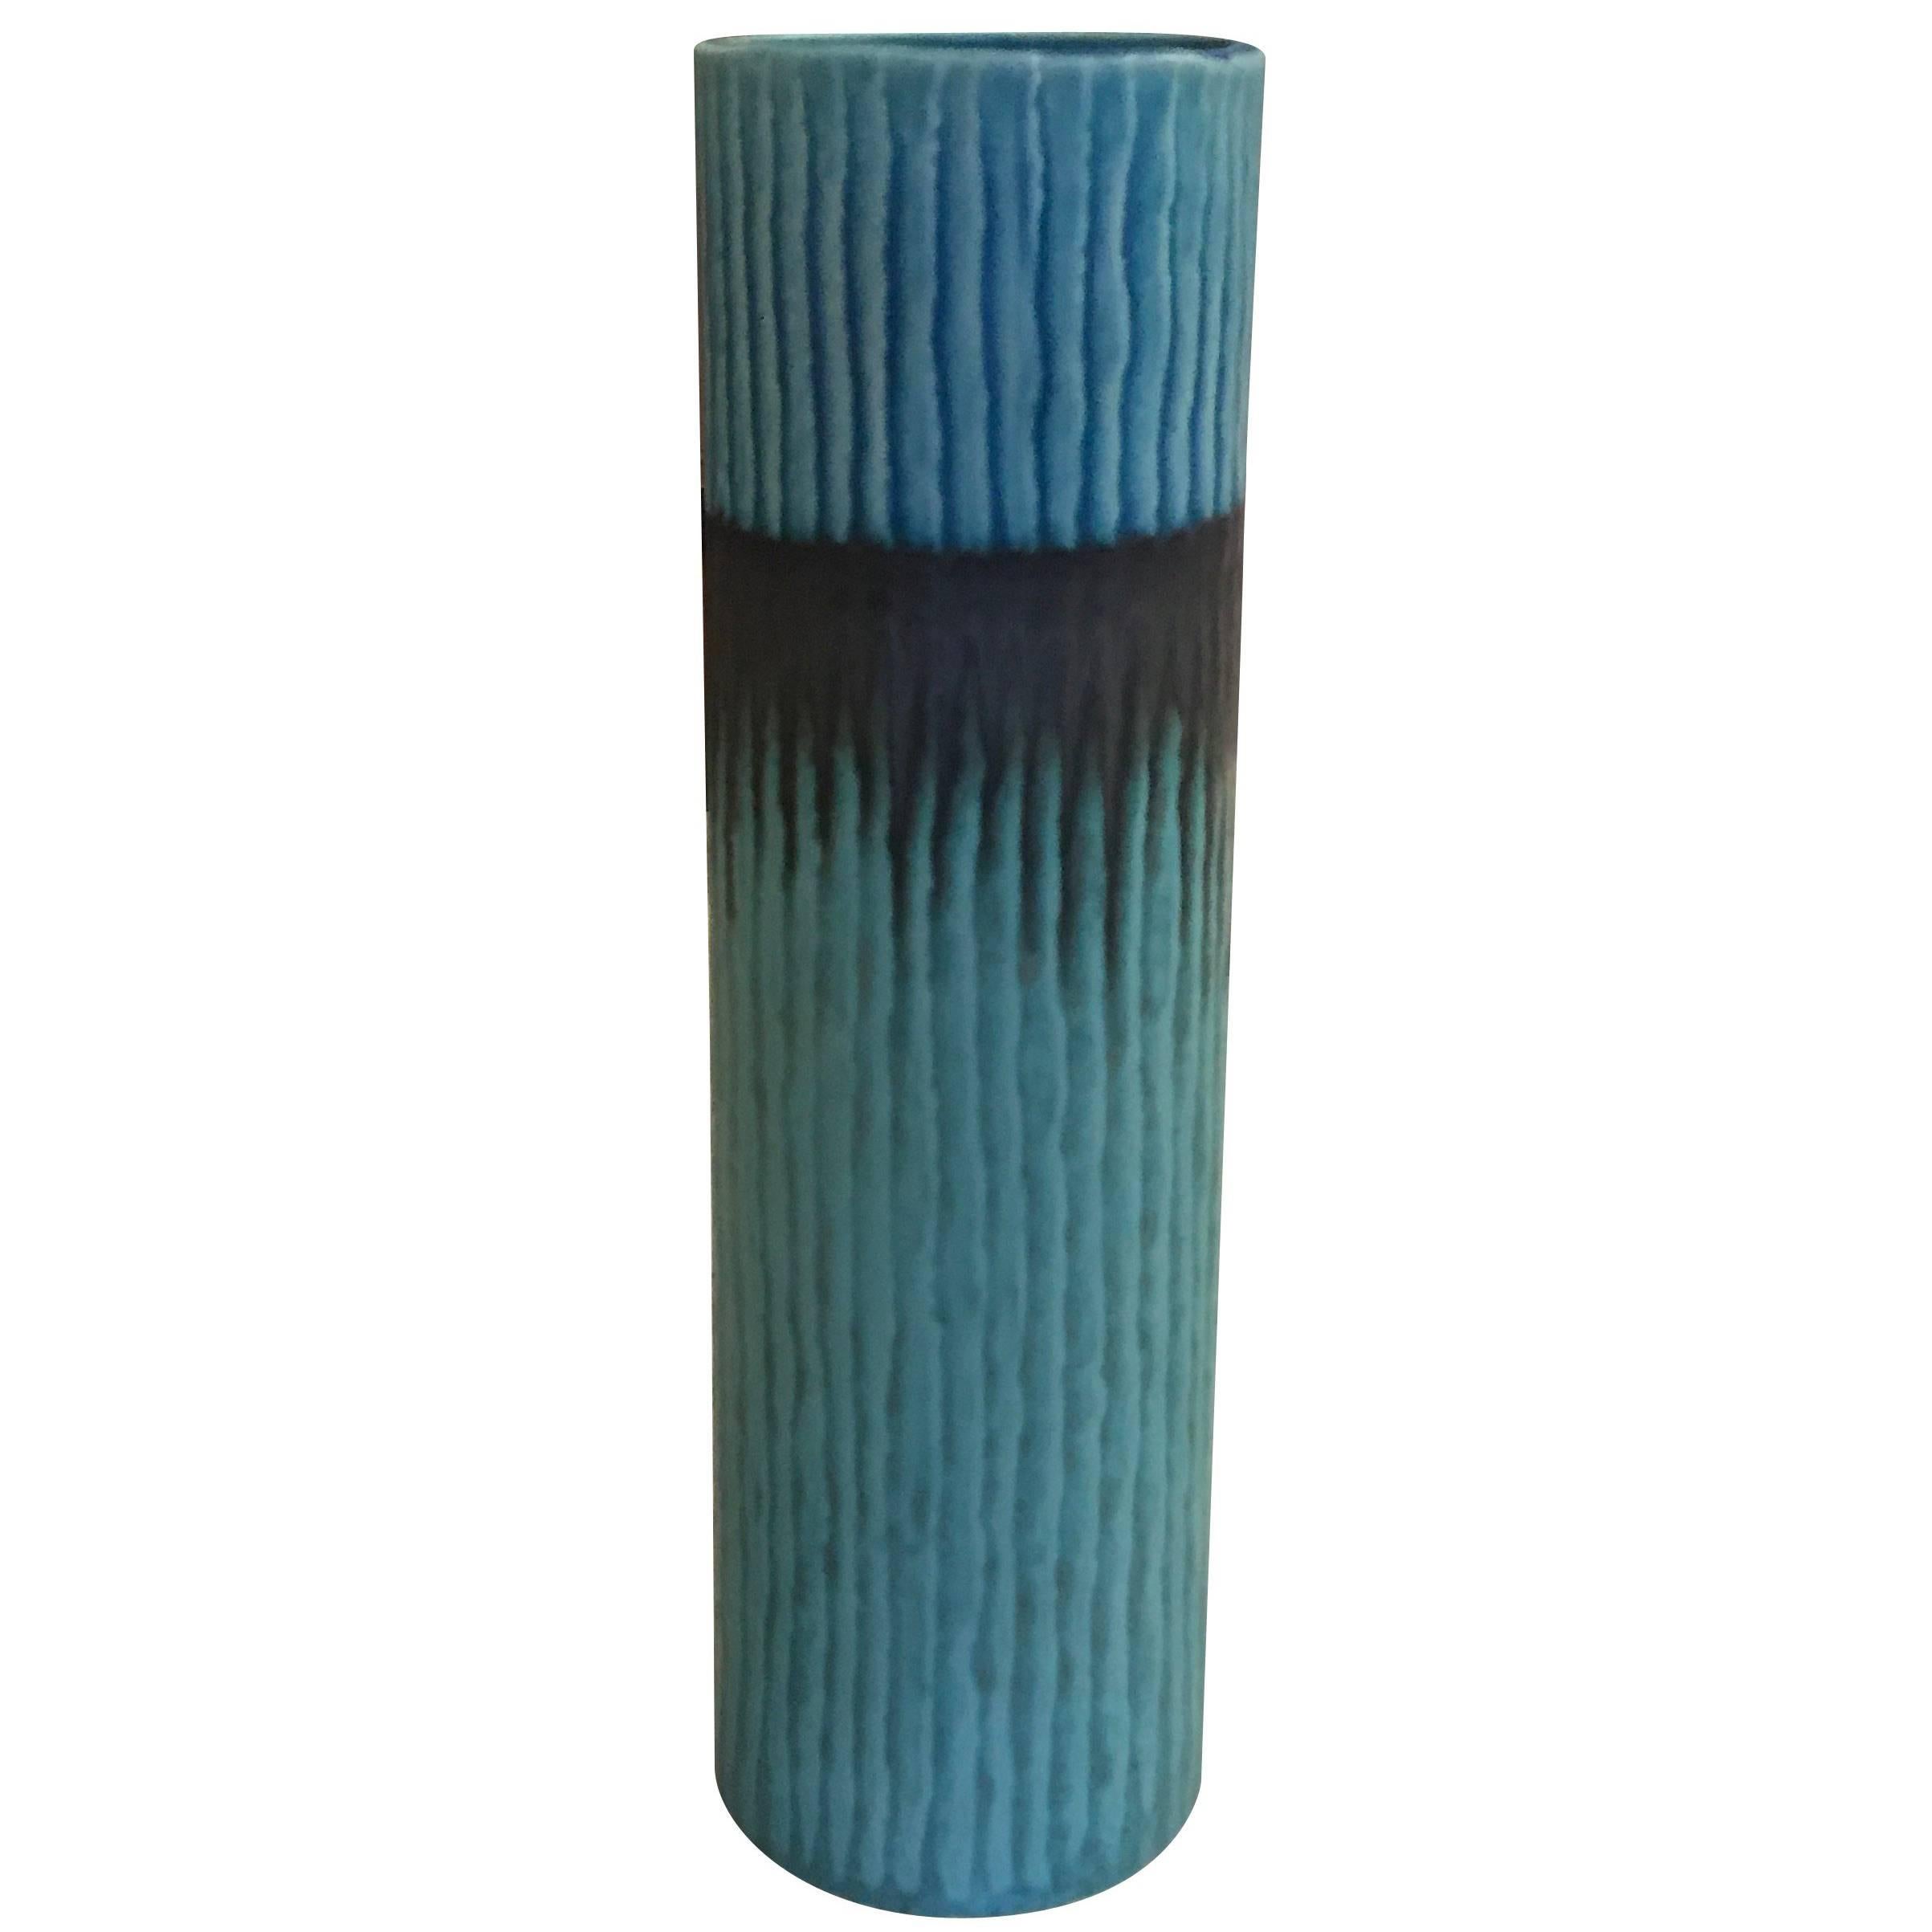 Vintage Inspired Shades of Blue Vase, Thailand, Contemporary